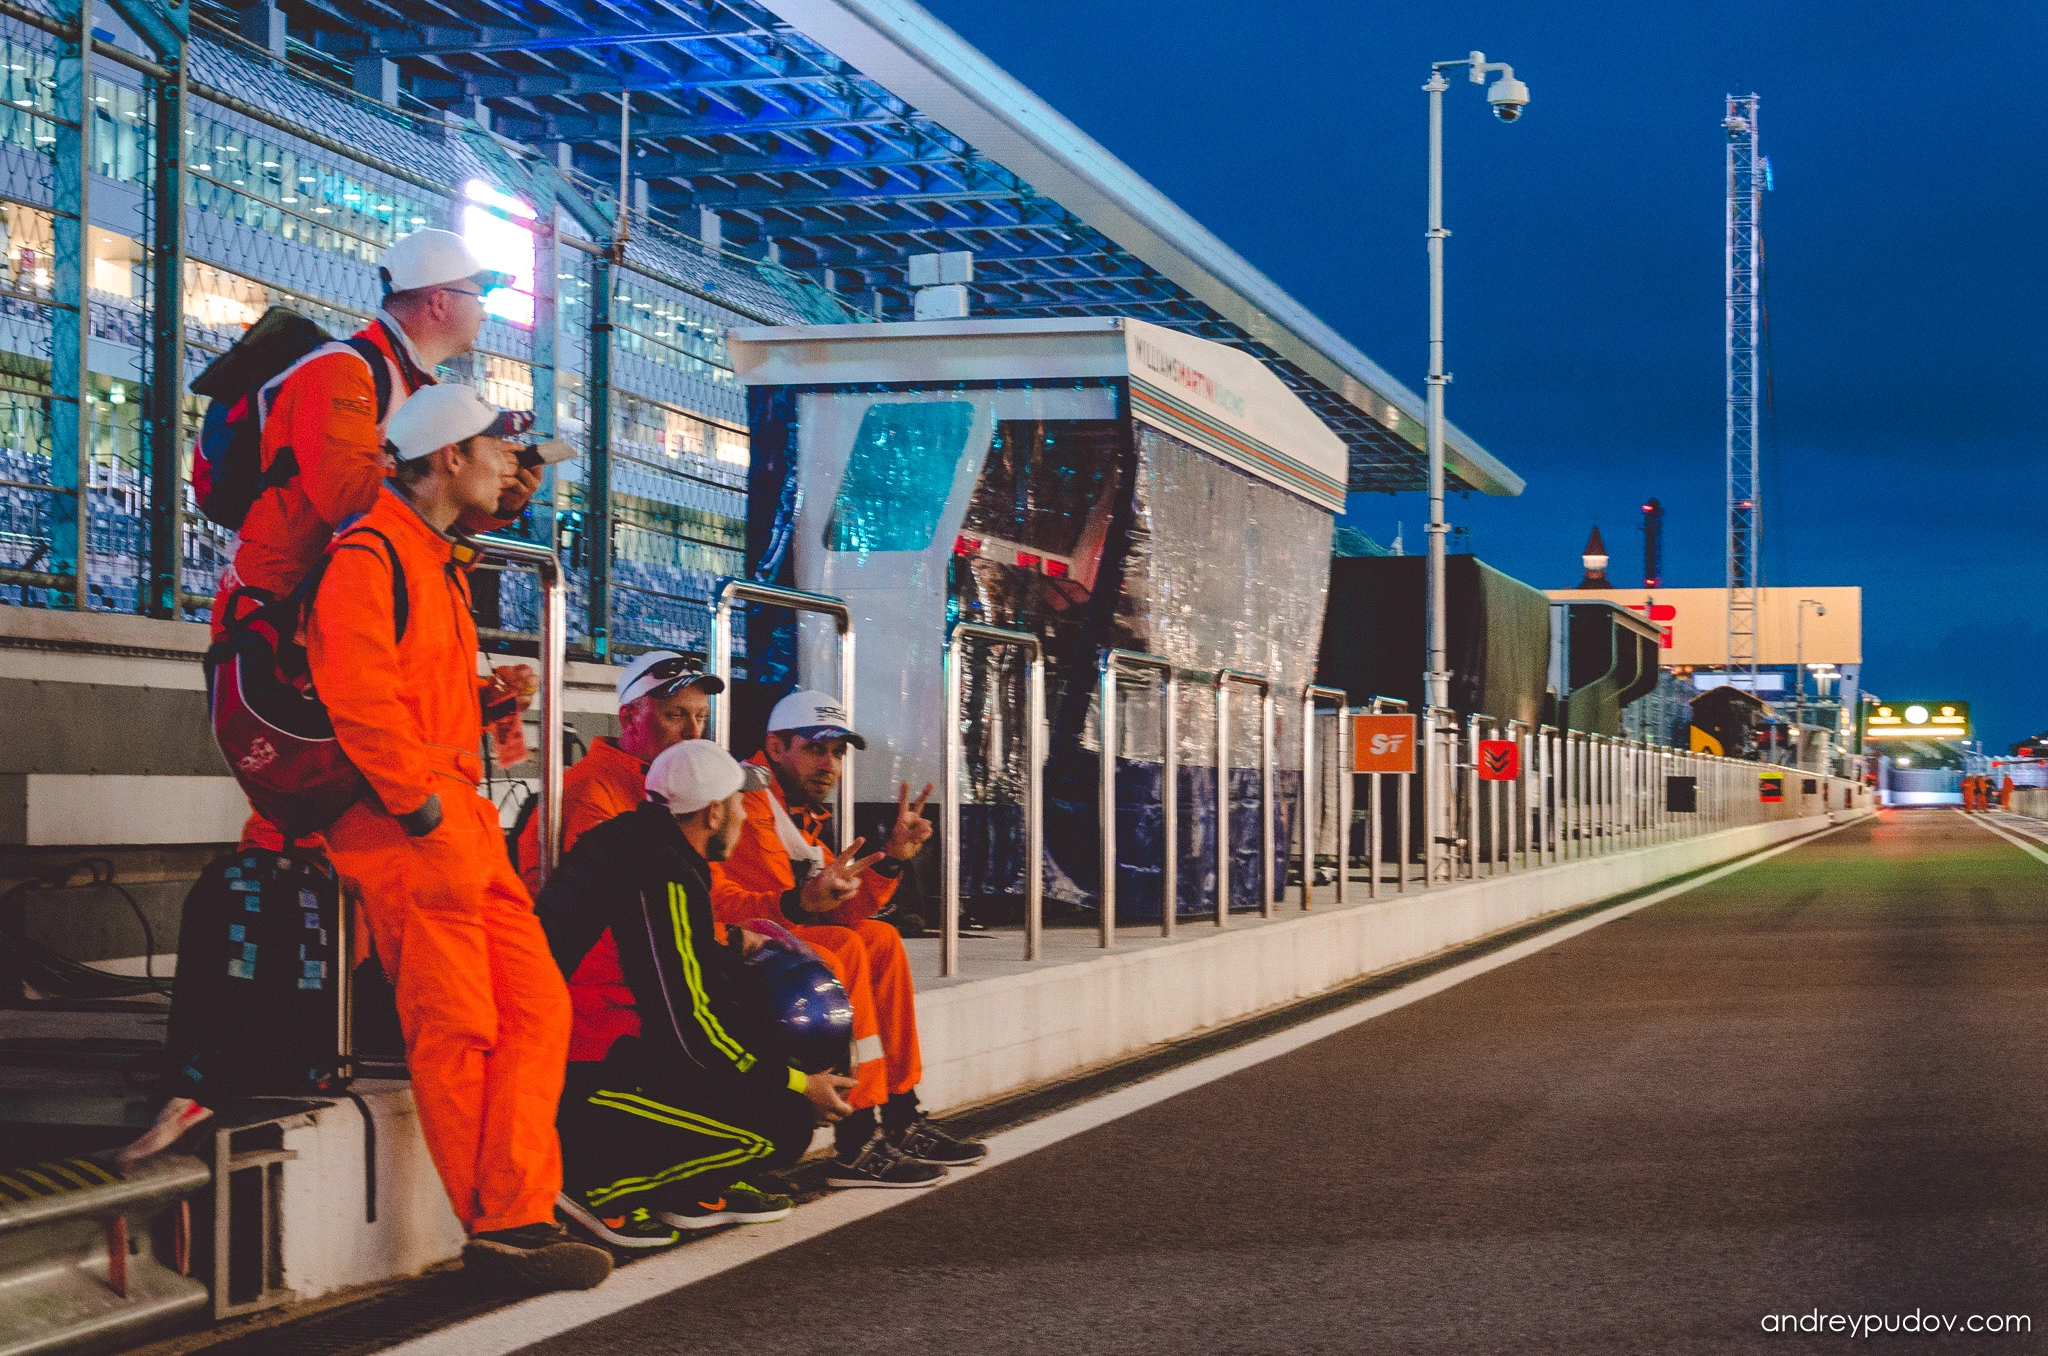 2016 Formula 1 Russian Grand Prix - Formula 1 Pit Marshals

Marshals play a vital part in allowing motorsport events to take place. Dressed in their unmistakable orange overalls, these volunteers carry out a variety of roles, such as moving damaged cars off the race track, to enable motorsport events to take place successfully and safely.